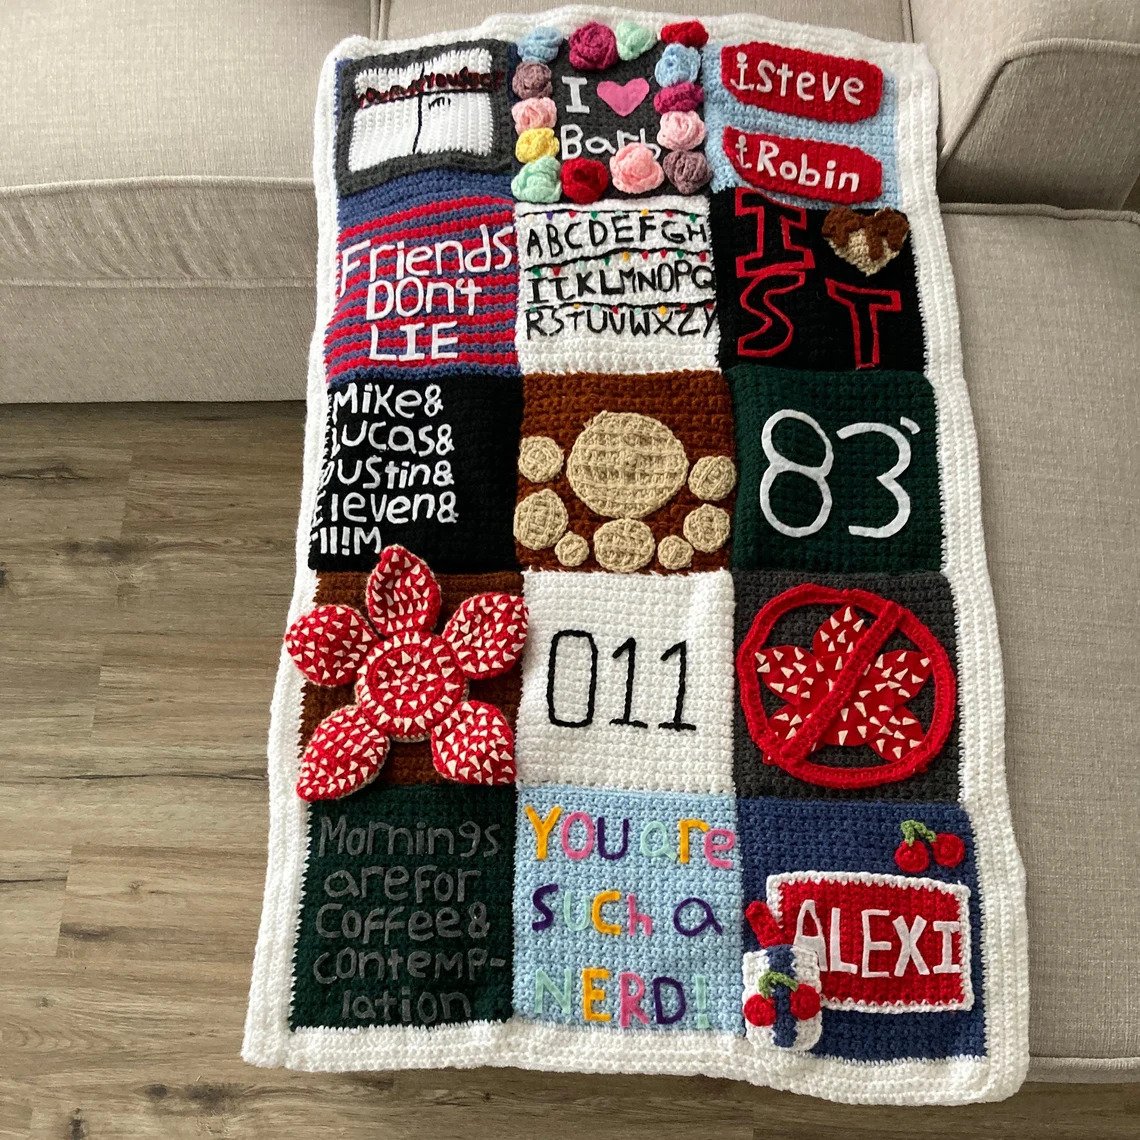 Pattern To Crochet an Awesome 'Stranger Things' Inspired Patchwork Quilt ... So Cool! 